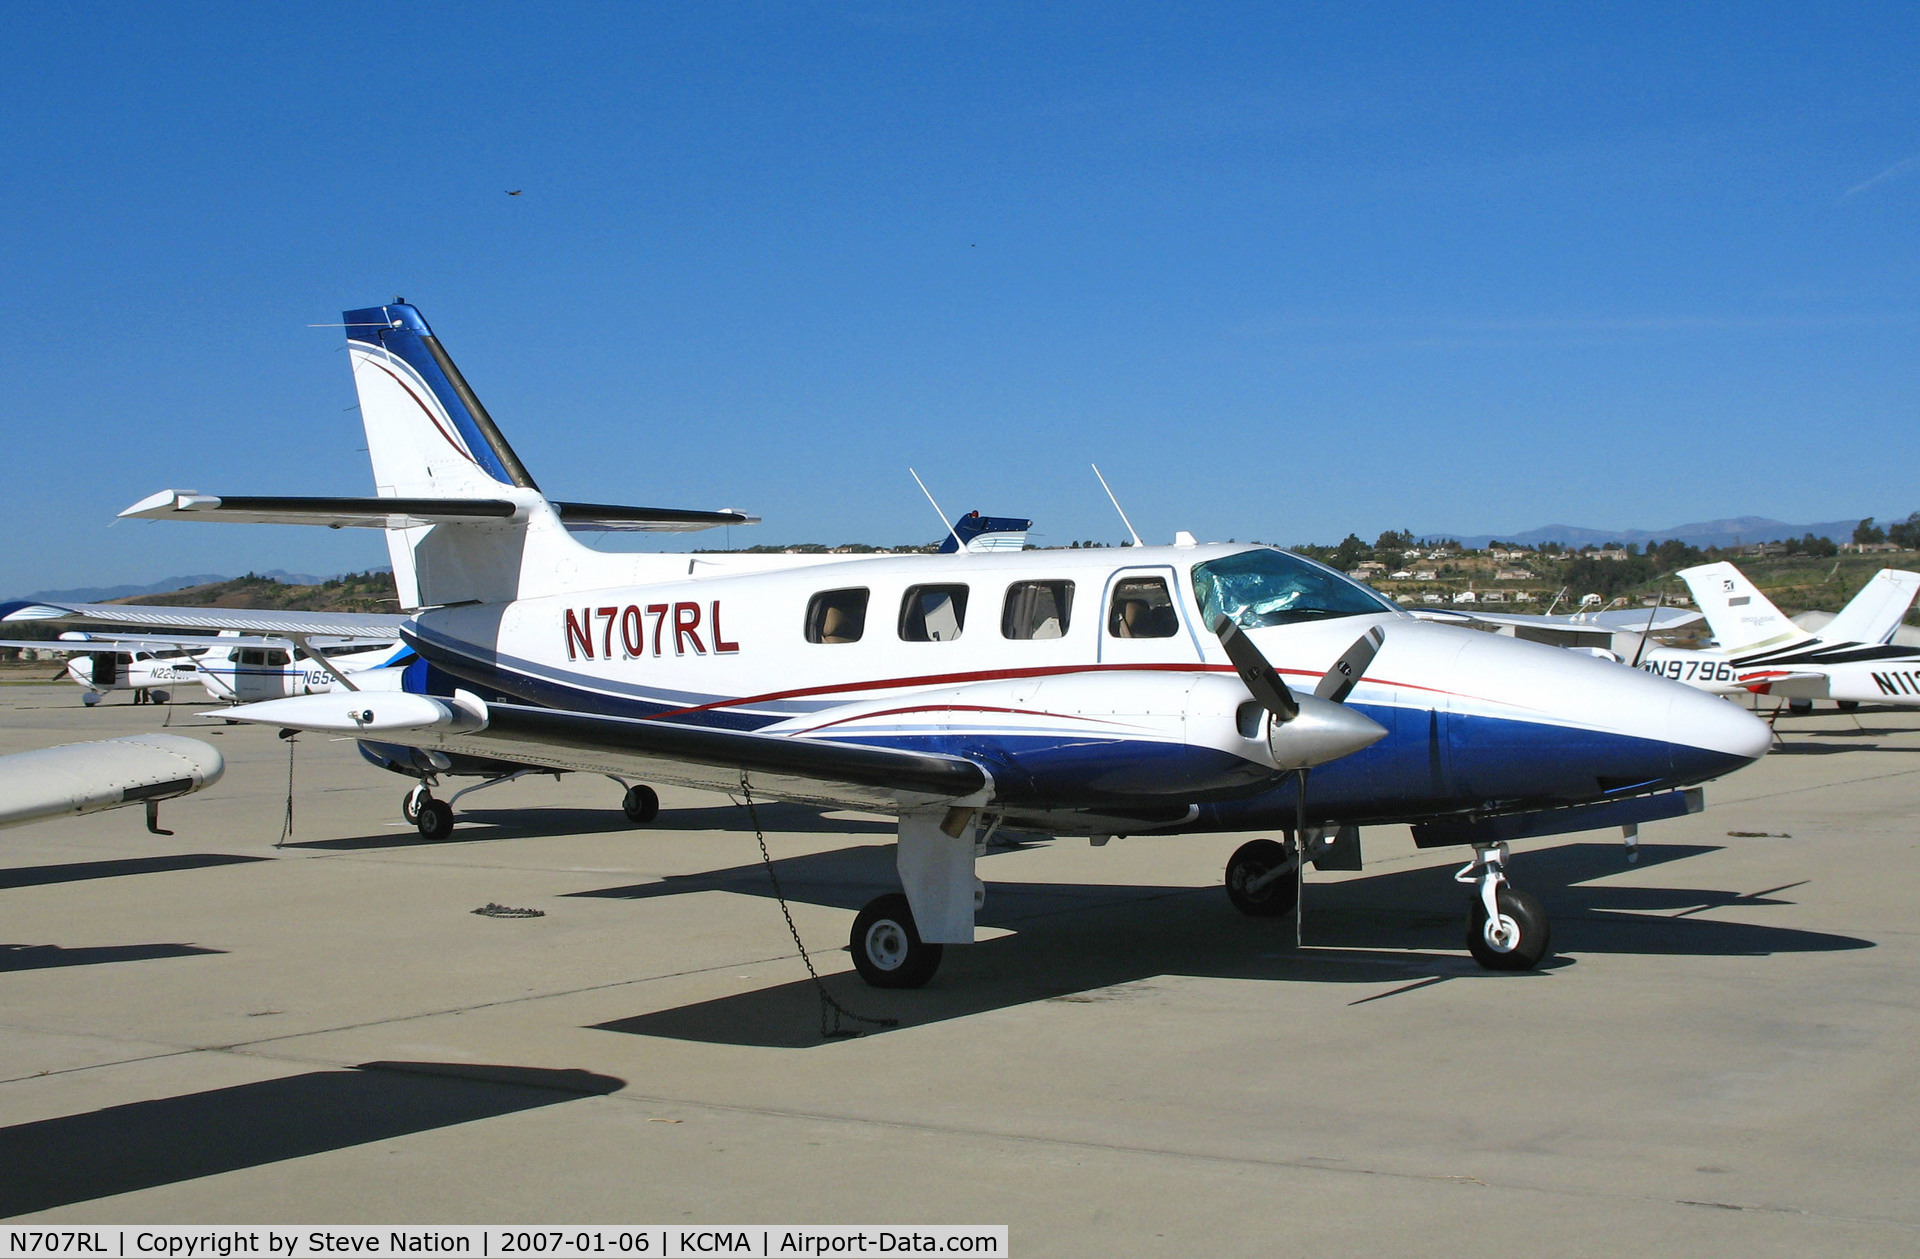 N707RL, 1981 Cessna T303 Crusader C/N T30300008, locally-based 1981 Cessna T303 on Channel Islands Aviation ramp